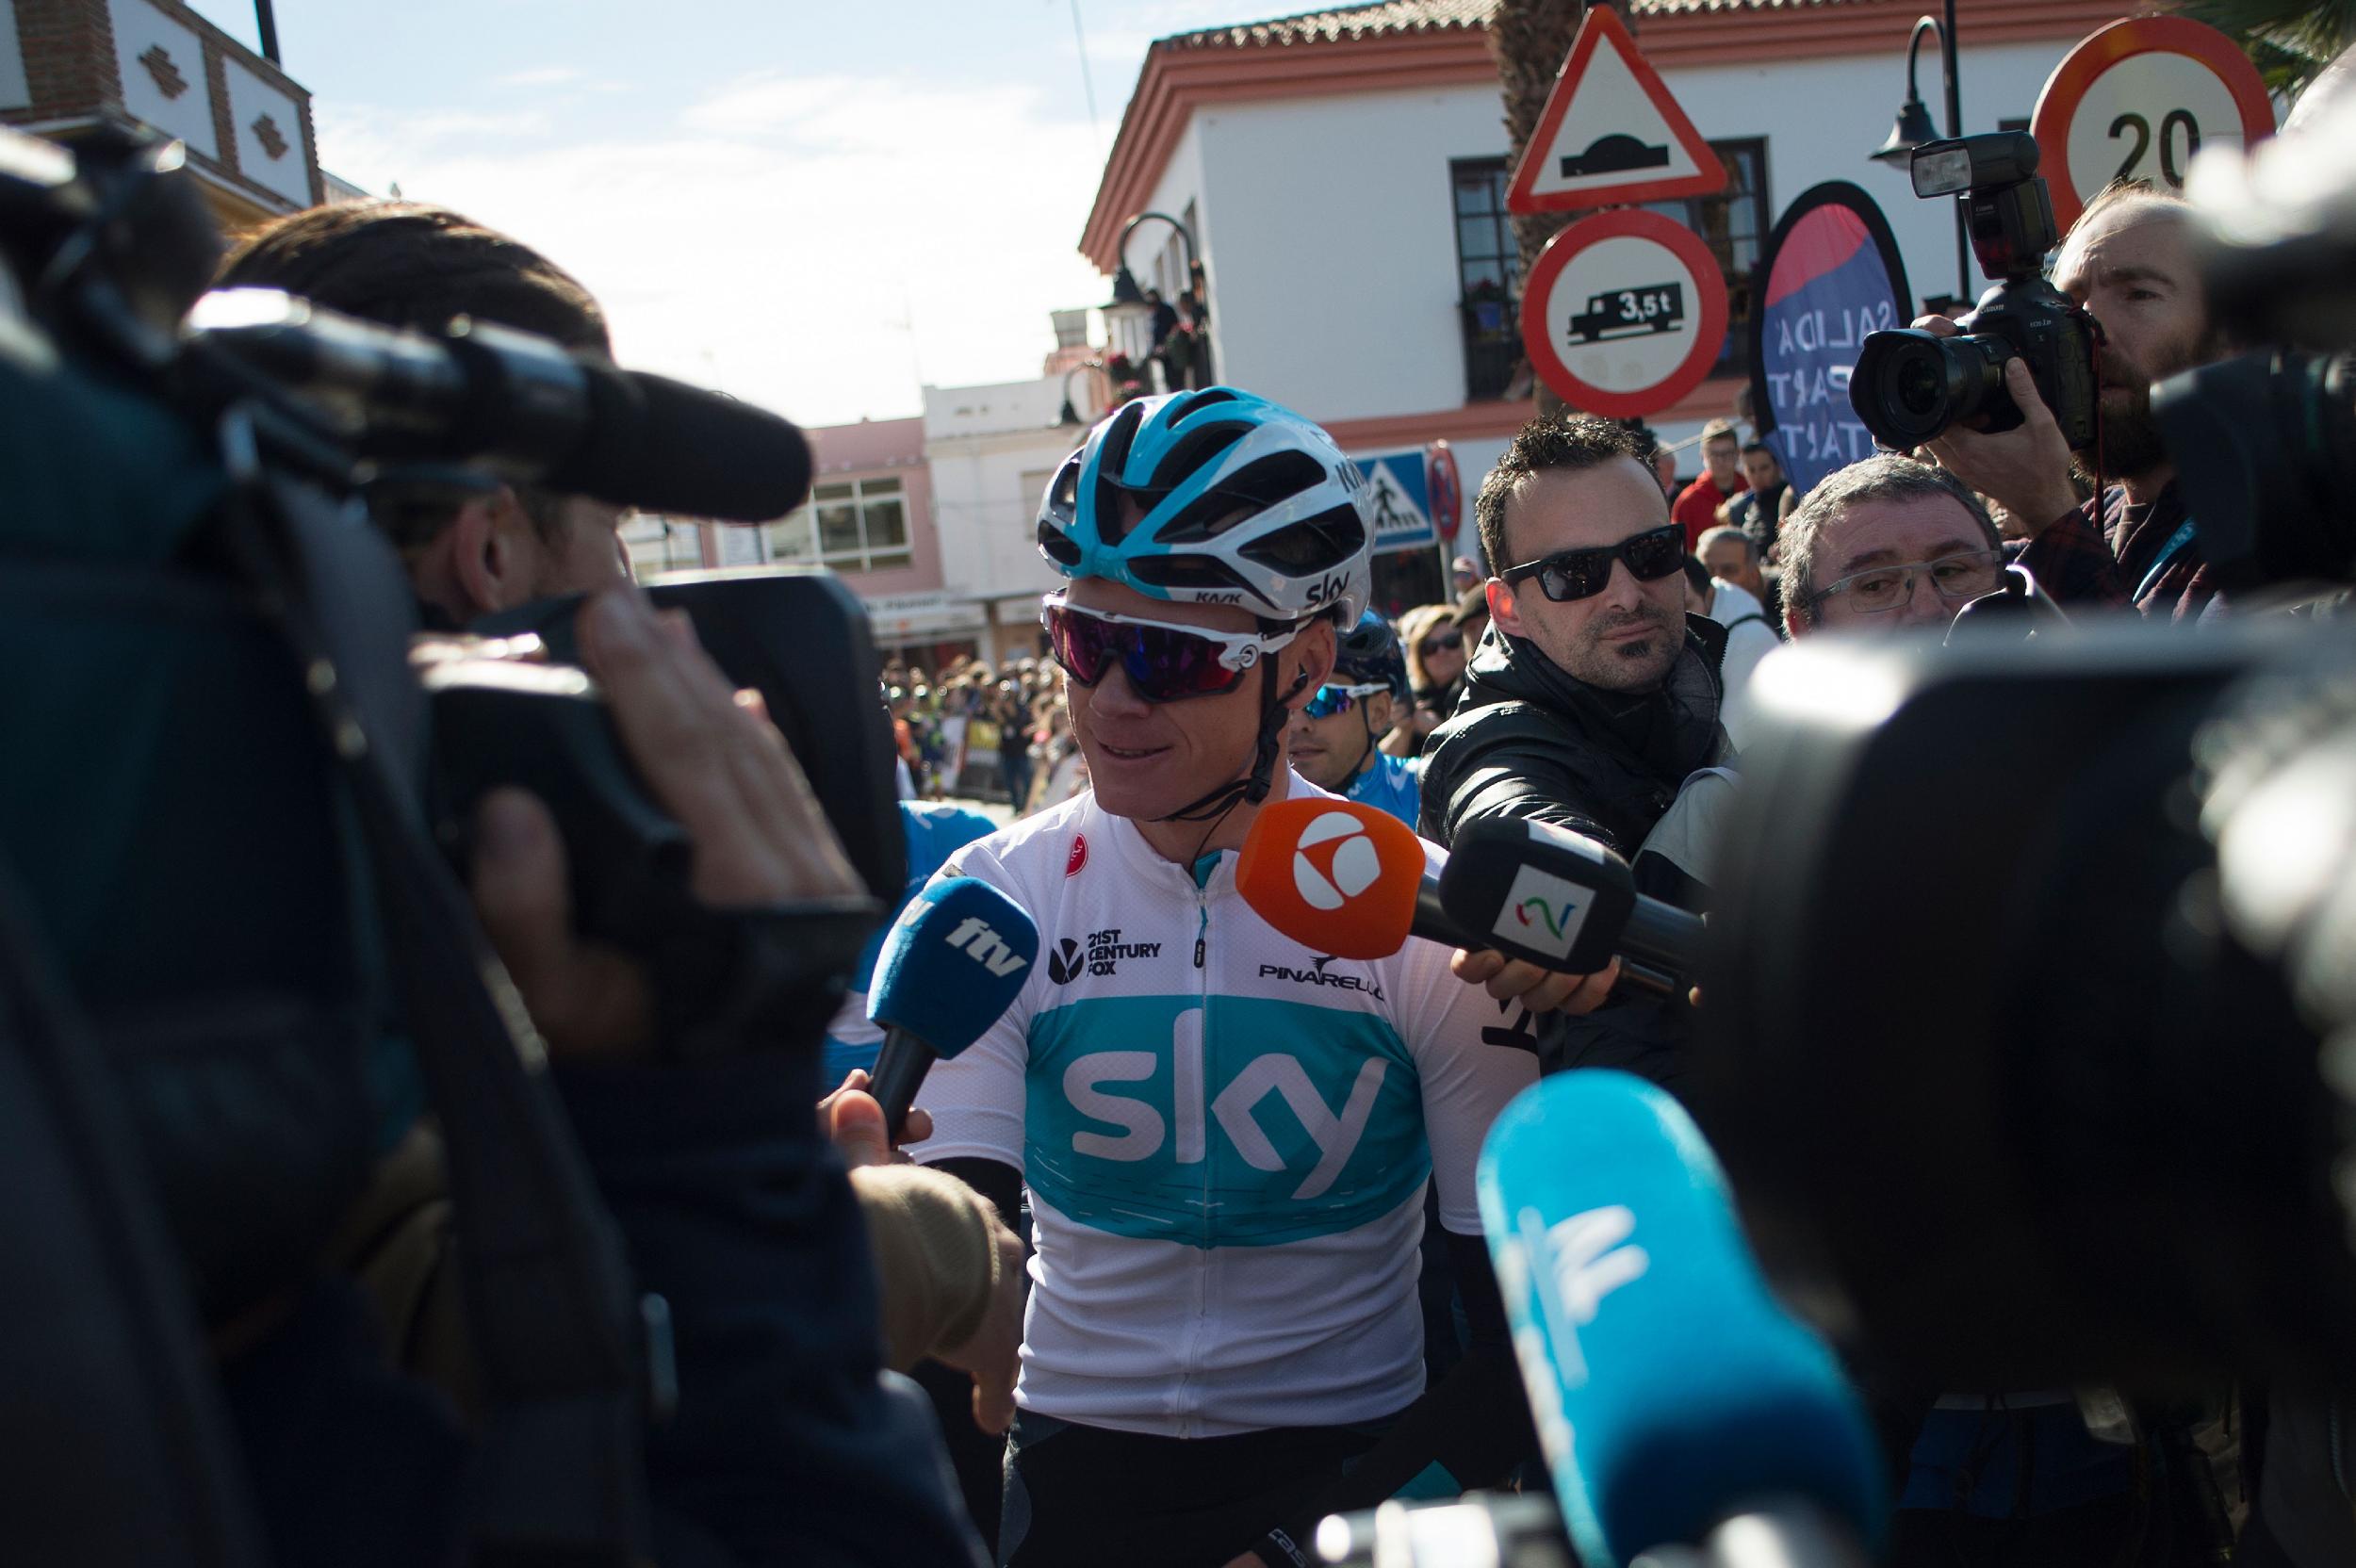 Chris Froome spoke to the media before the start of the opening stage